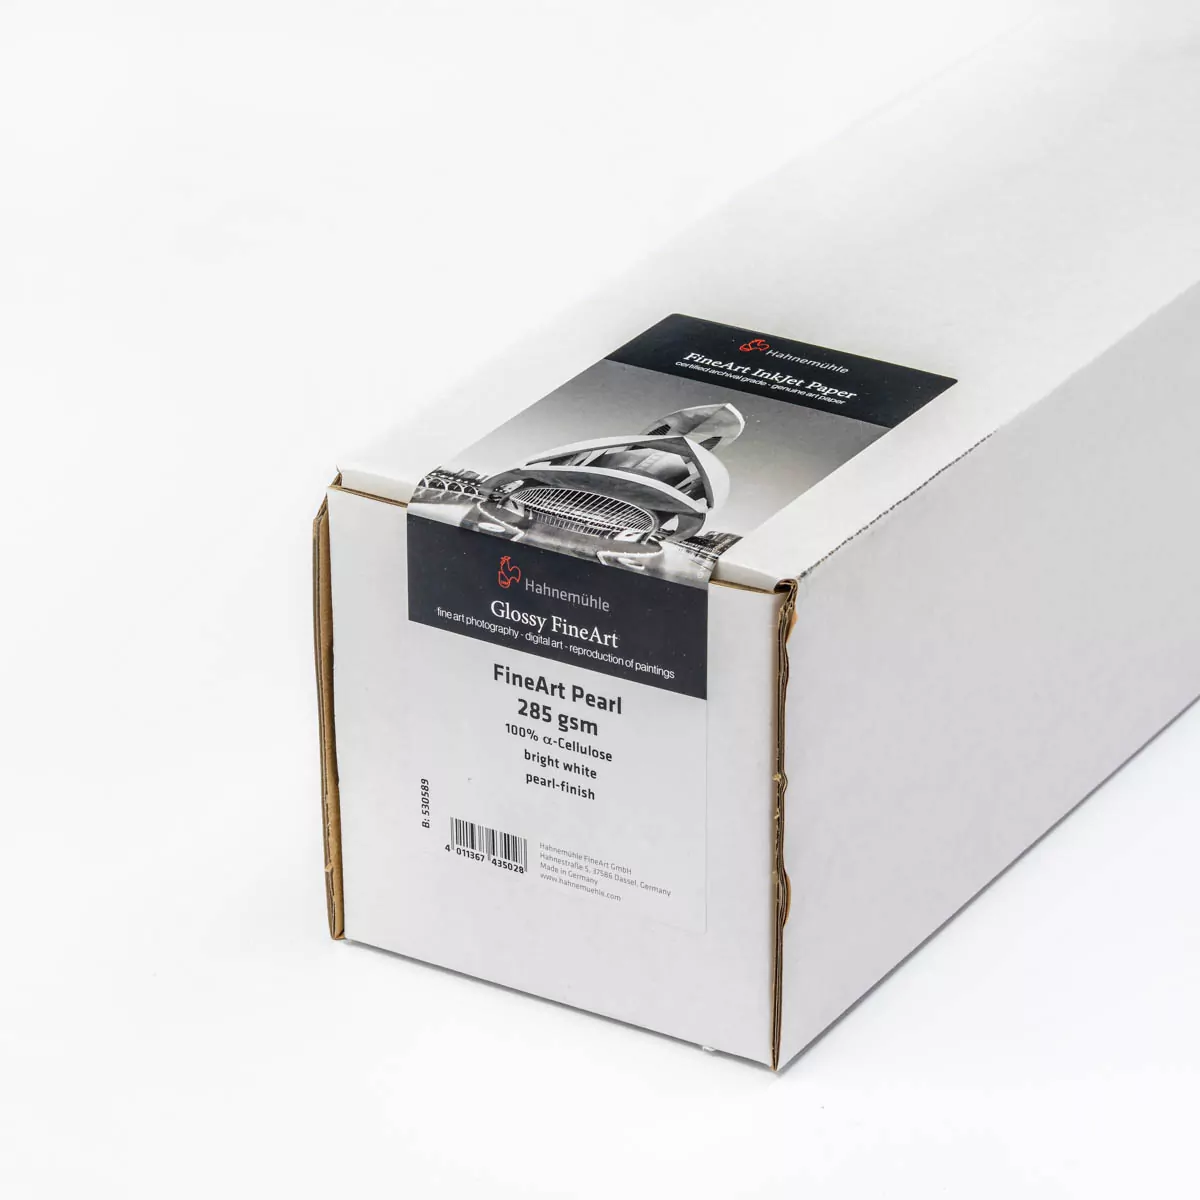 Hahnemuhle FineArt Pearl 285gsm 36″(91cm)x12m roll